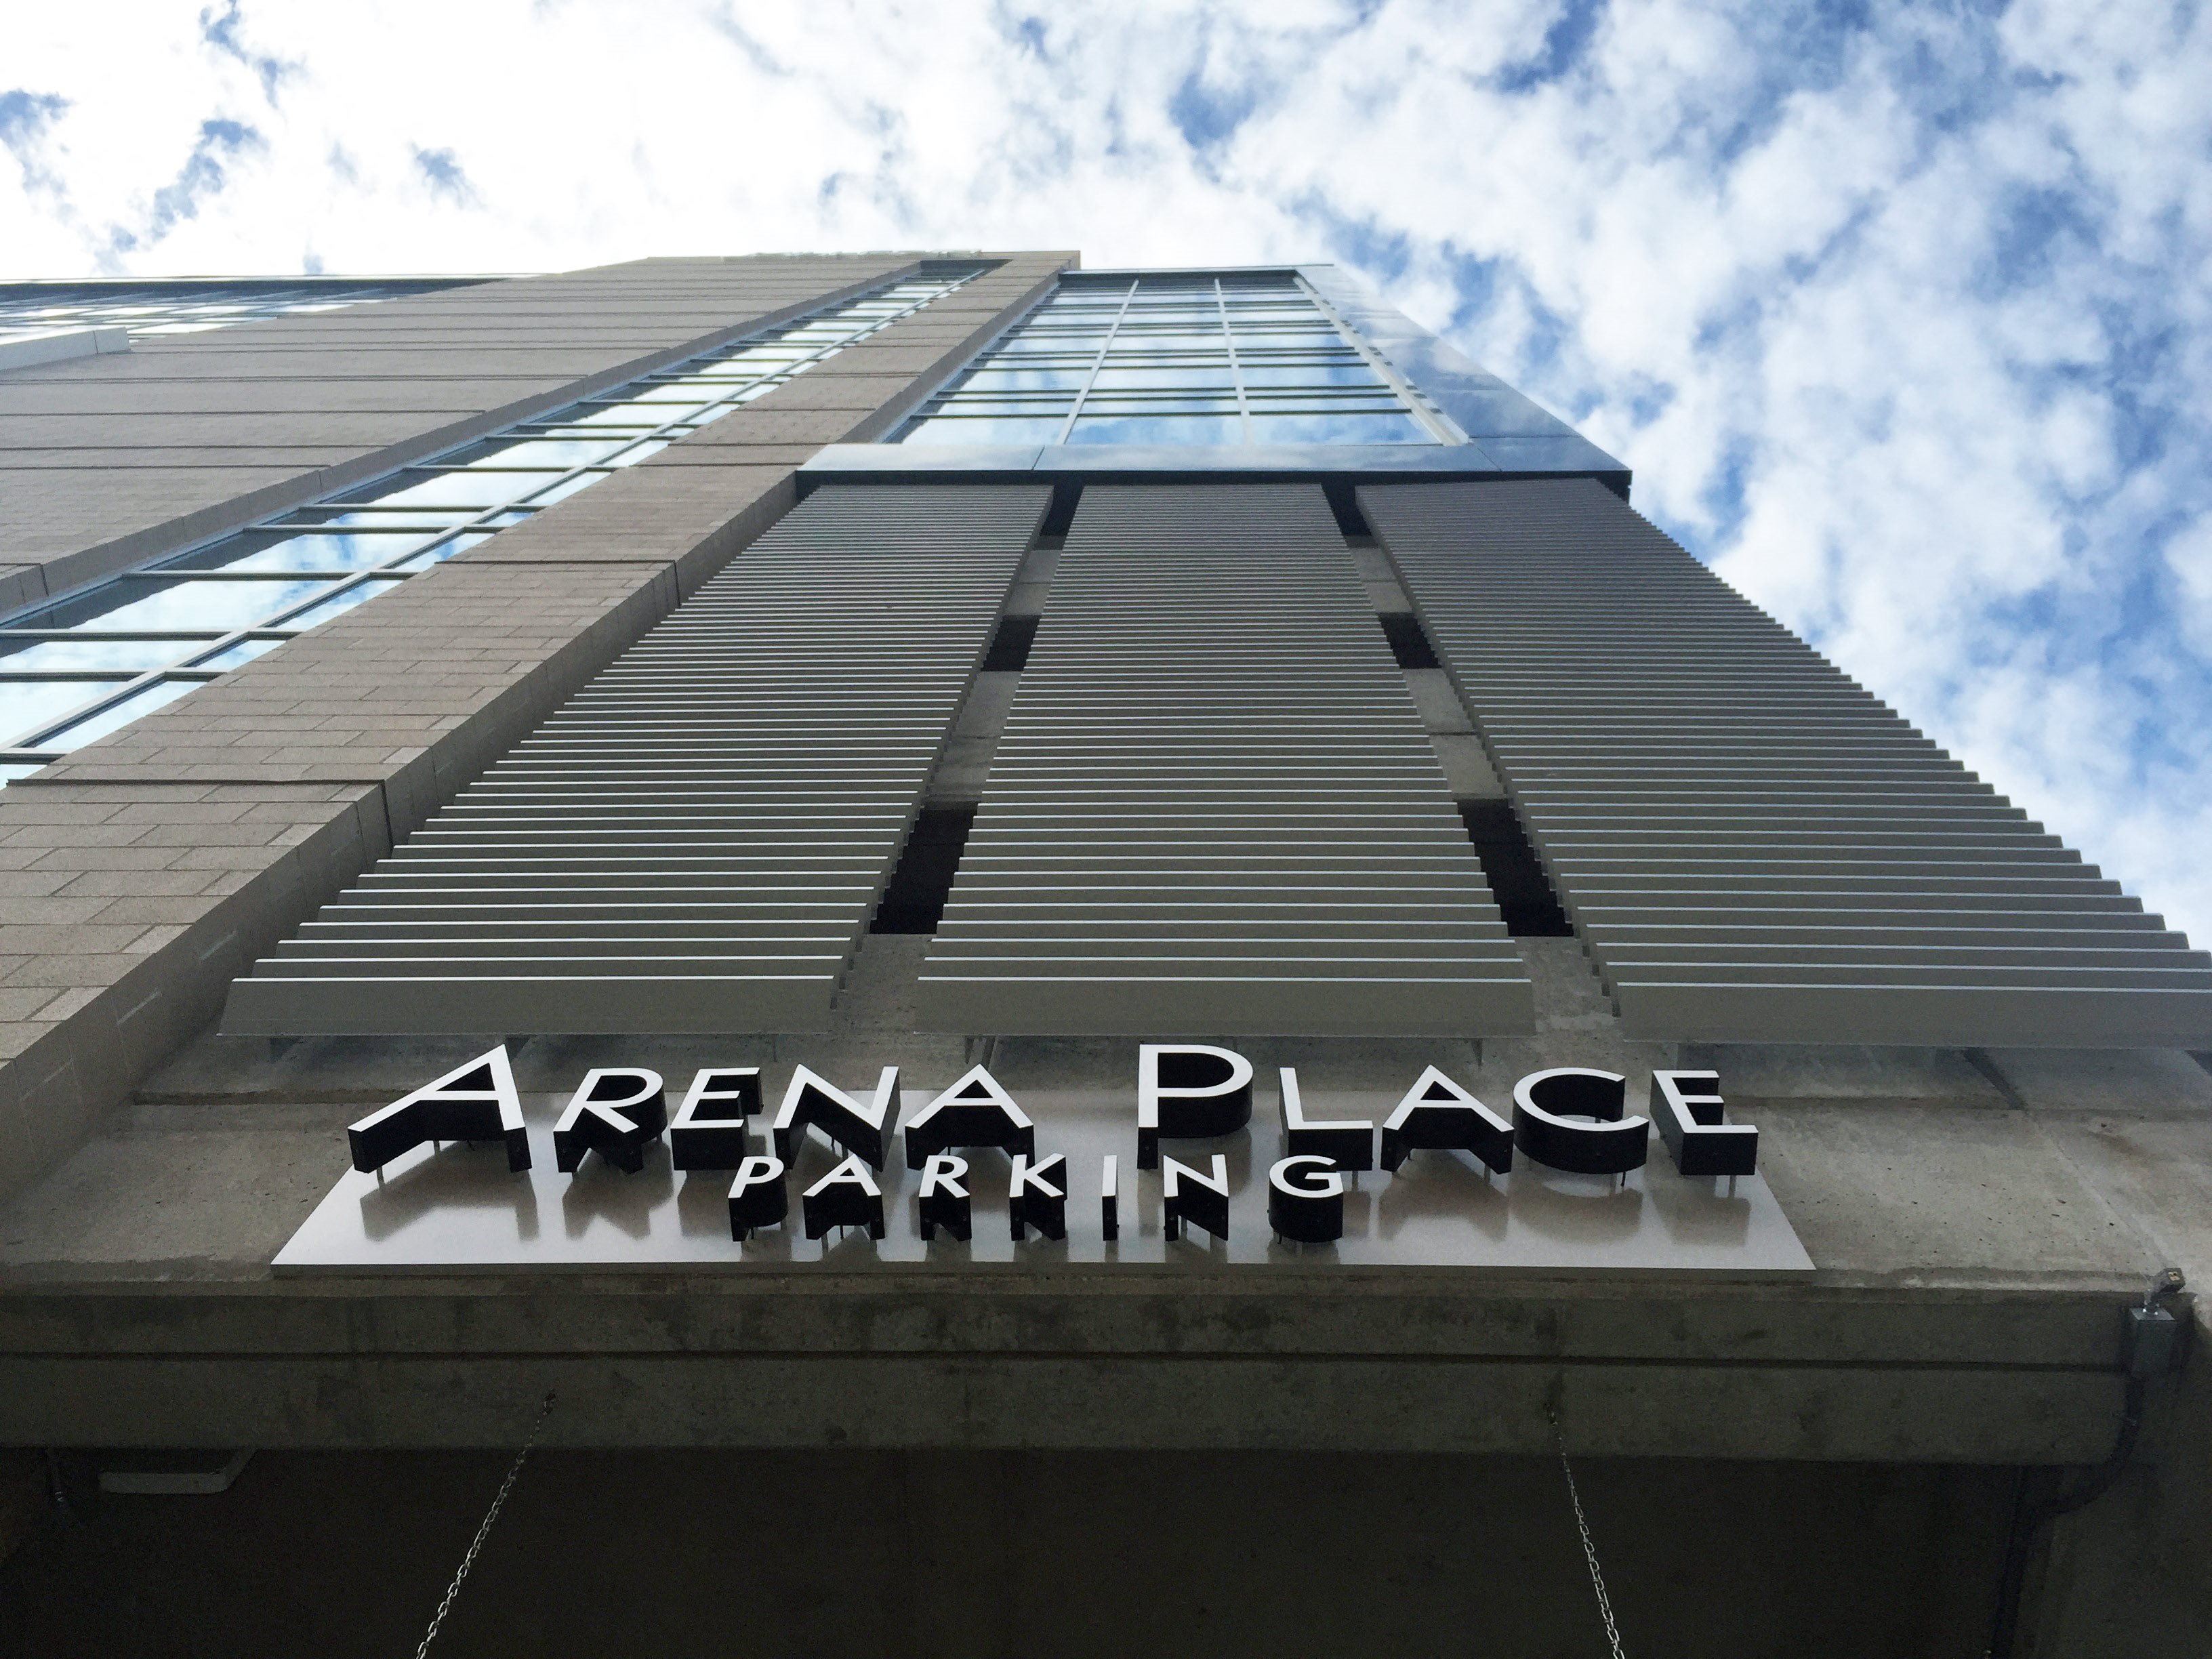 New Arena Place Apartments Grand Rapids Mi 49503 with Best Design